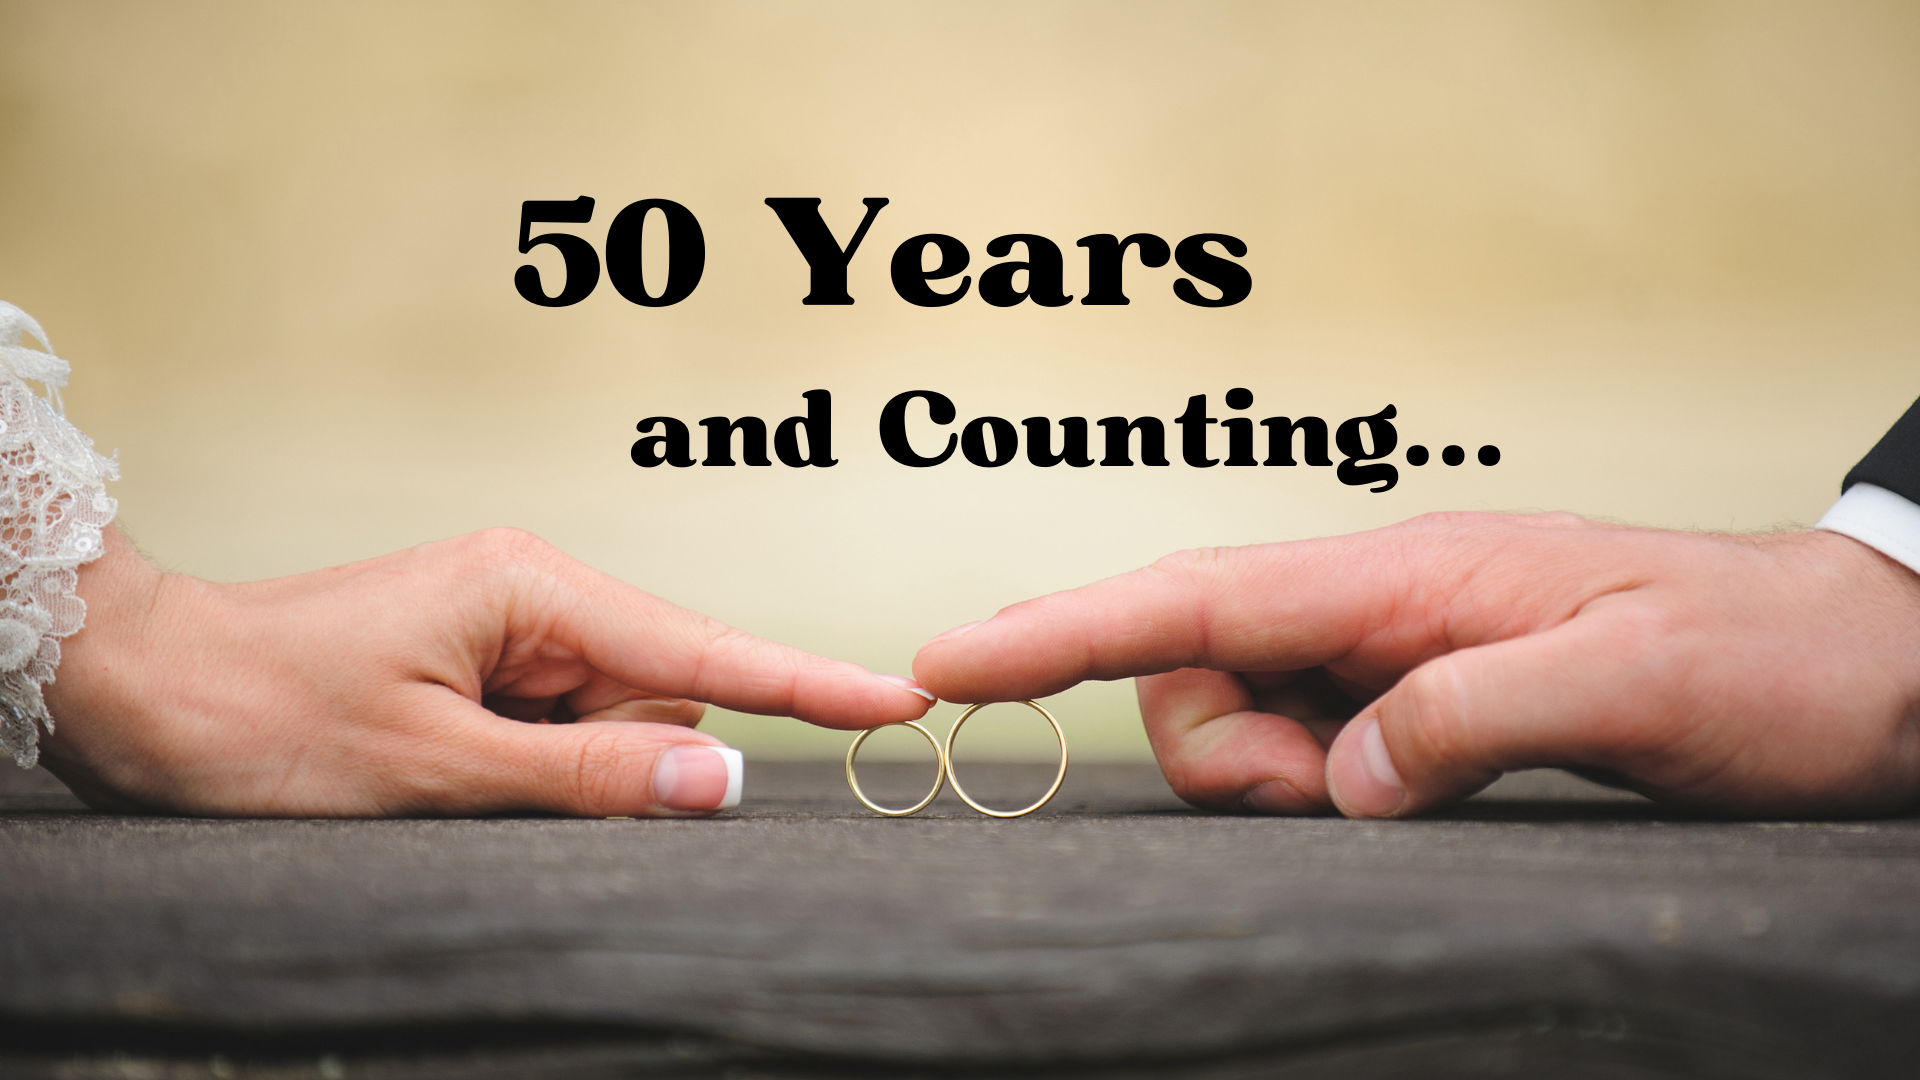 50 Years and Counting - Adobe Stock